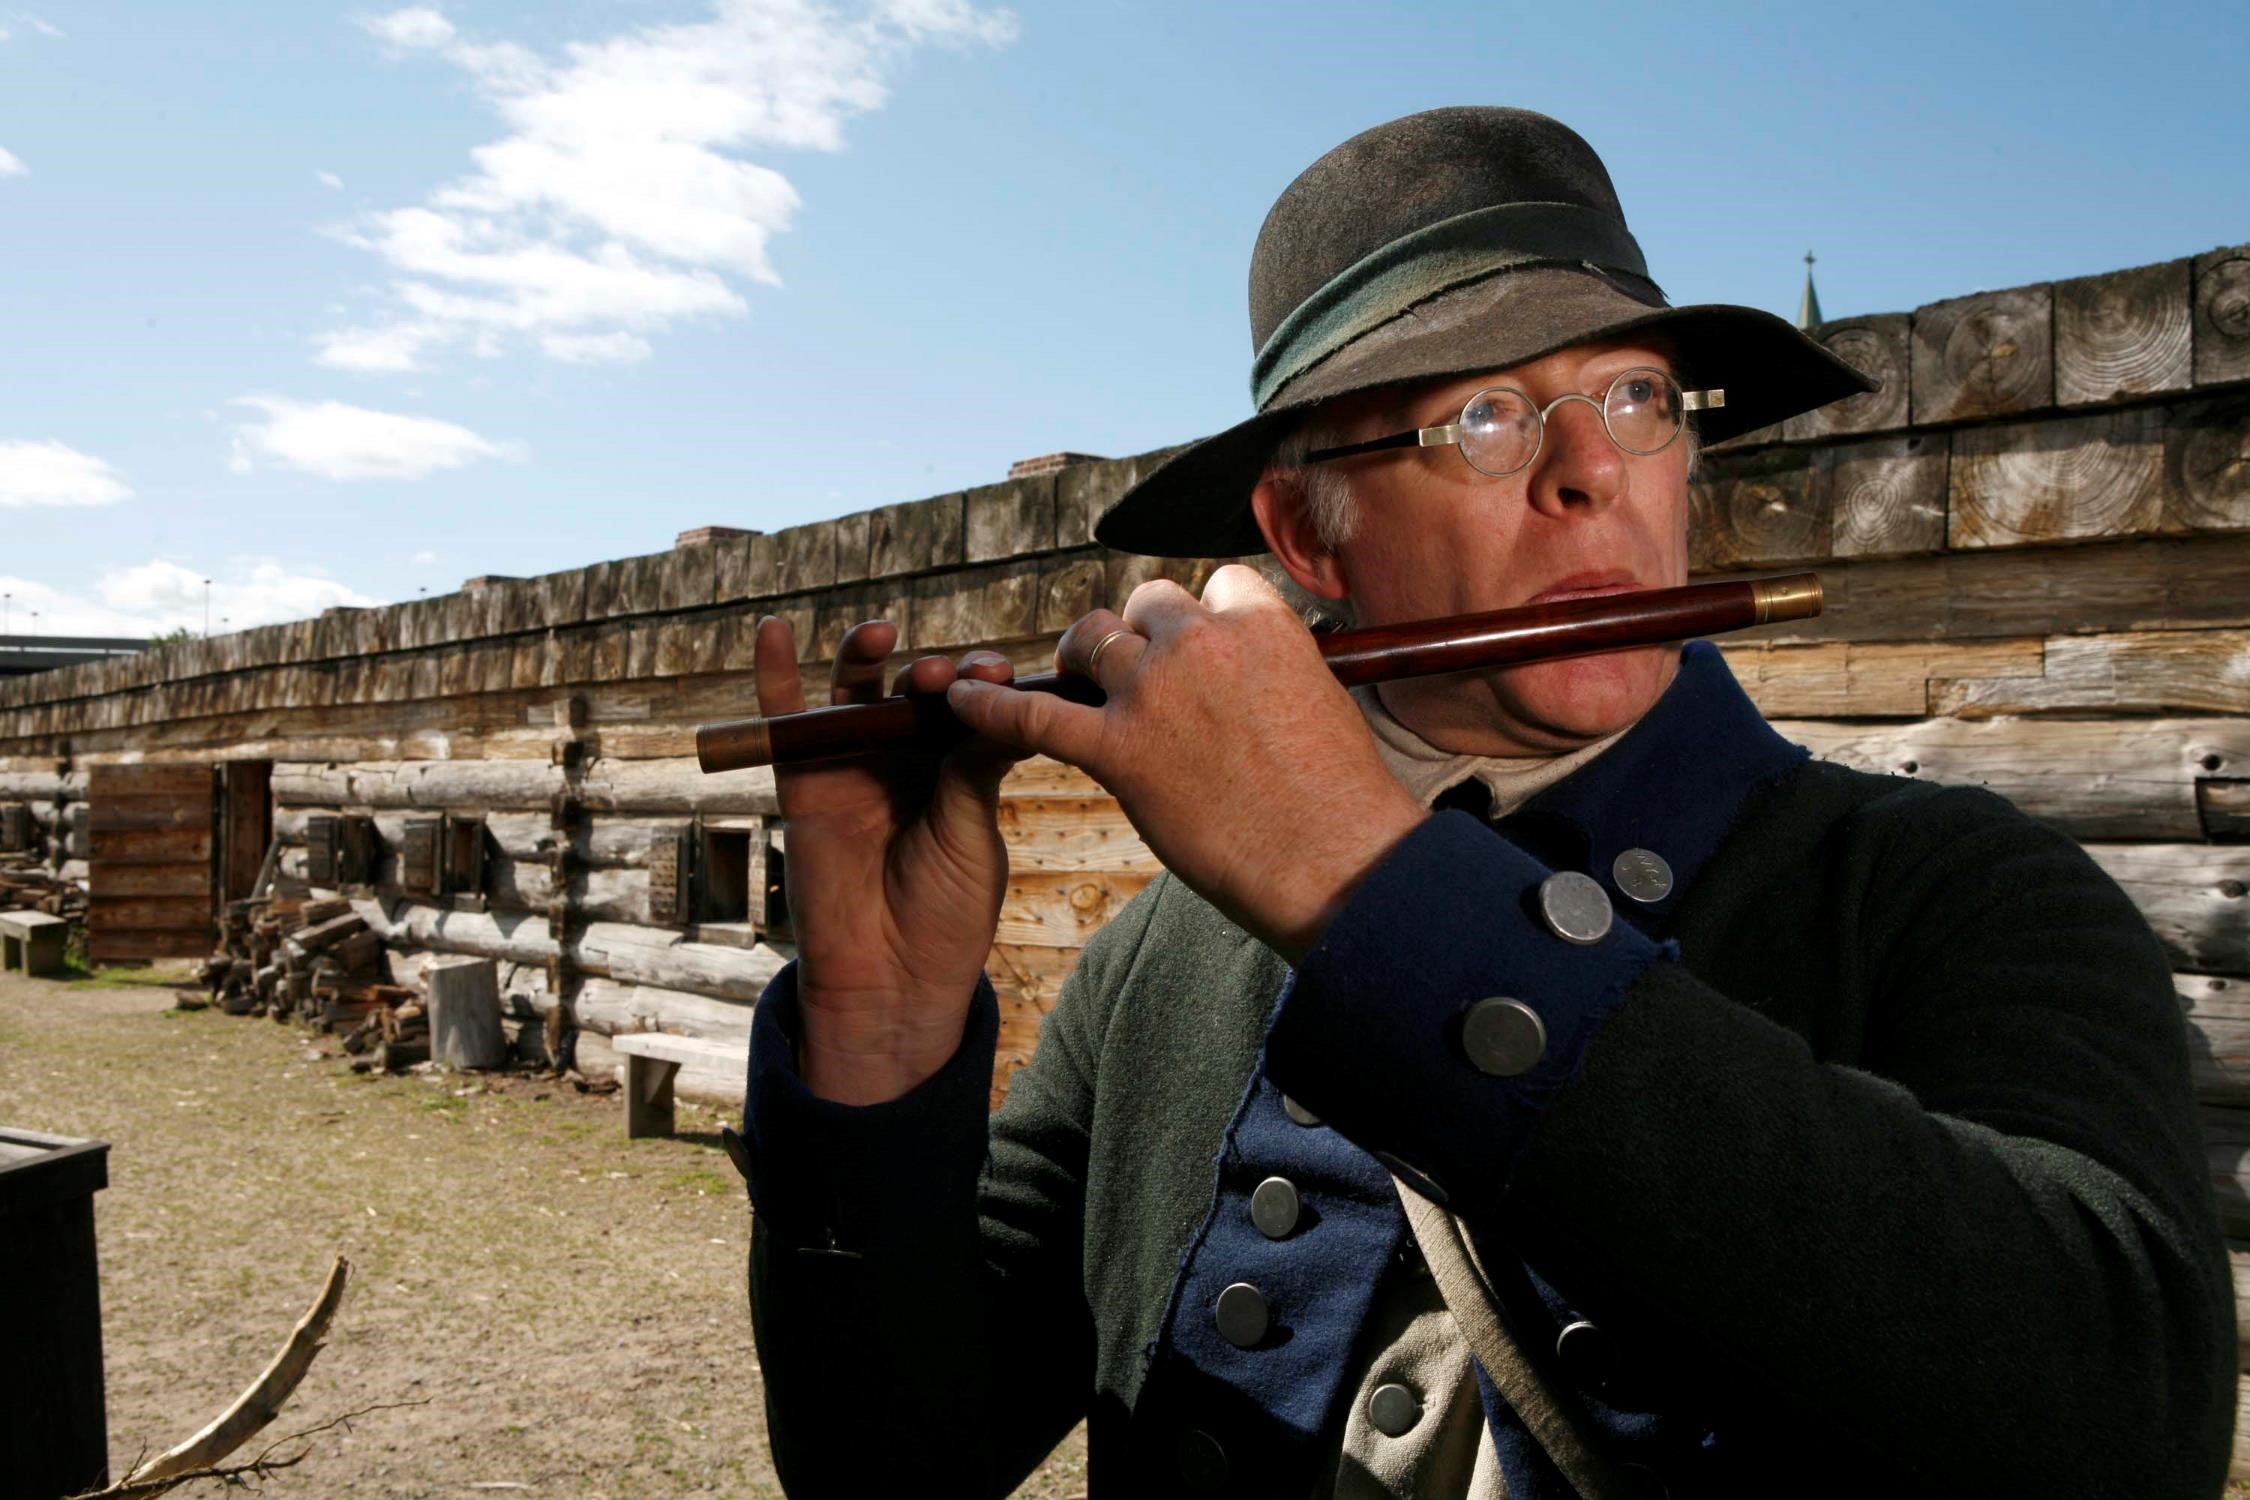 A man dressed as an 18th-century soldier plays a small flute while standing inside a wooden fort during a historical reenactment.